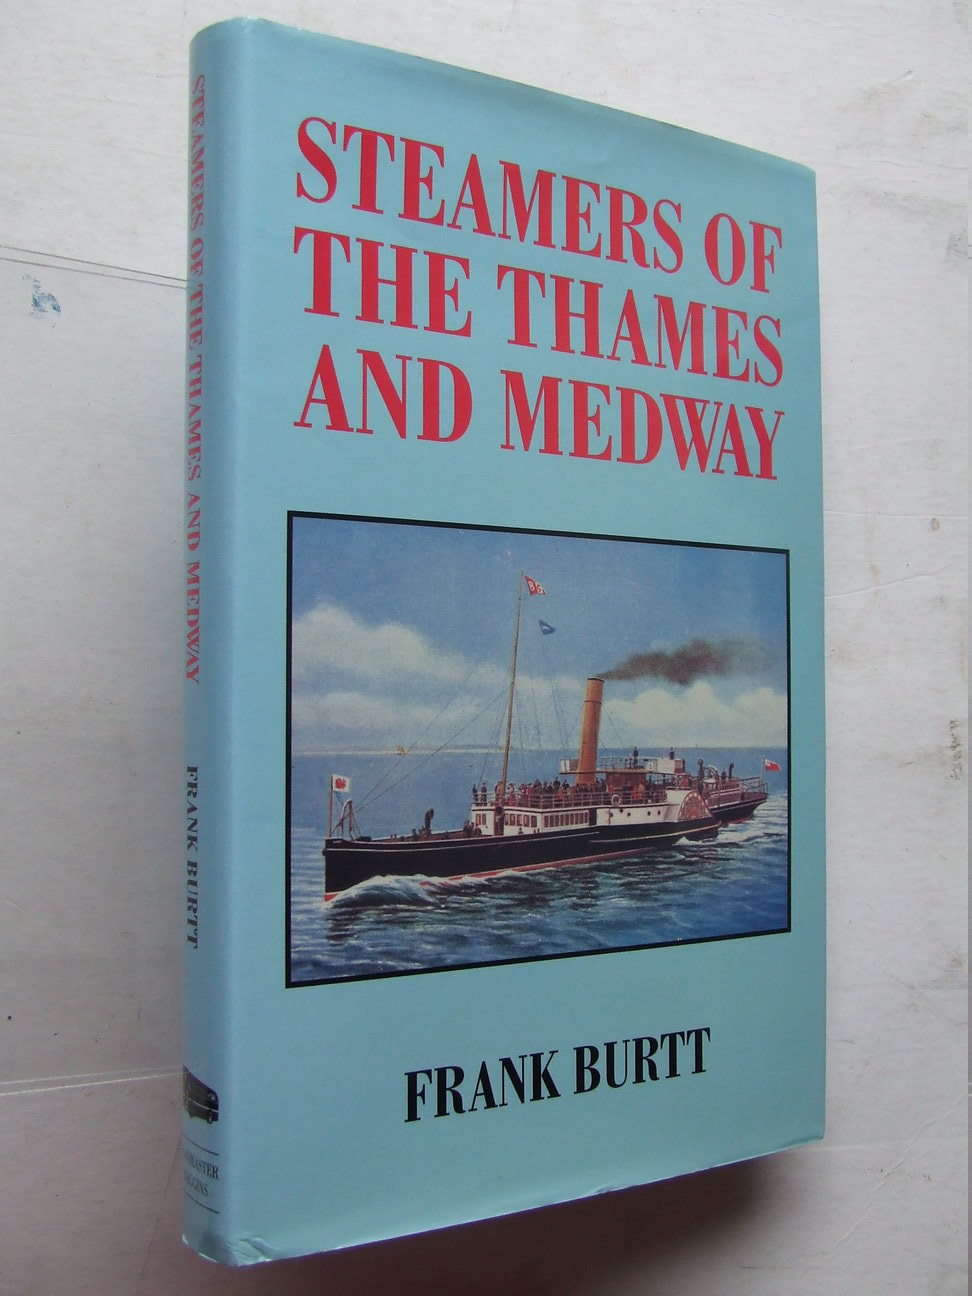 Steamers of the Thames and Medway